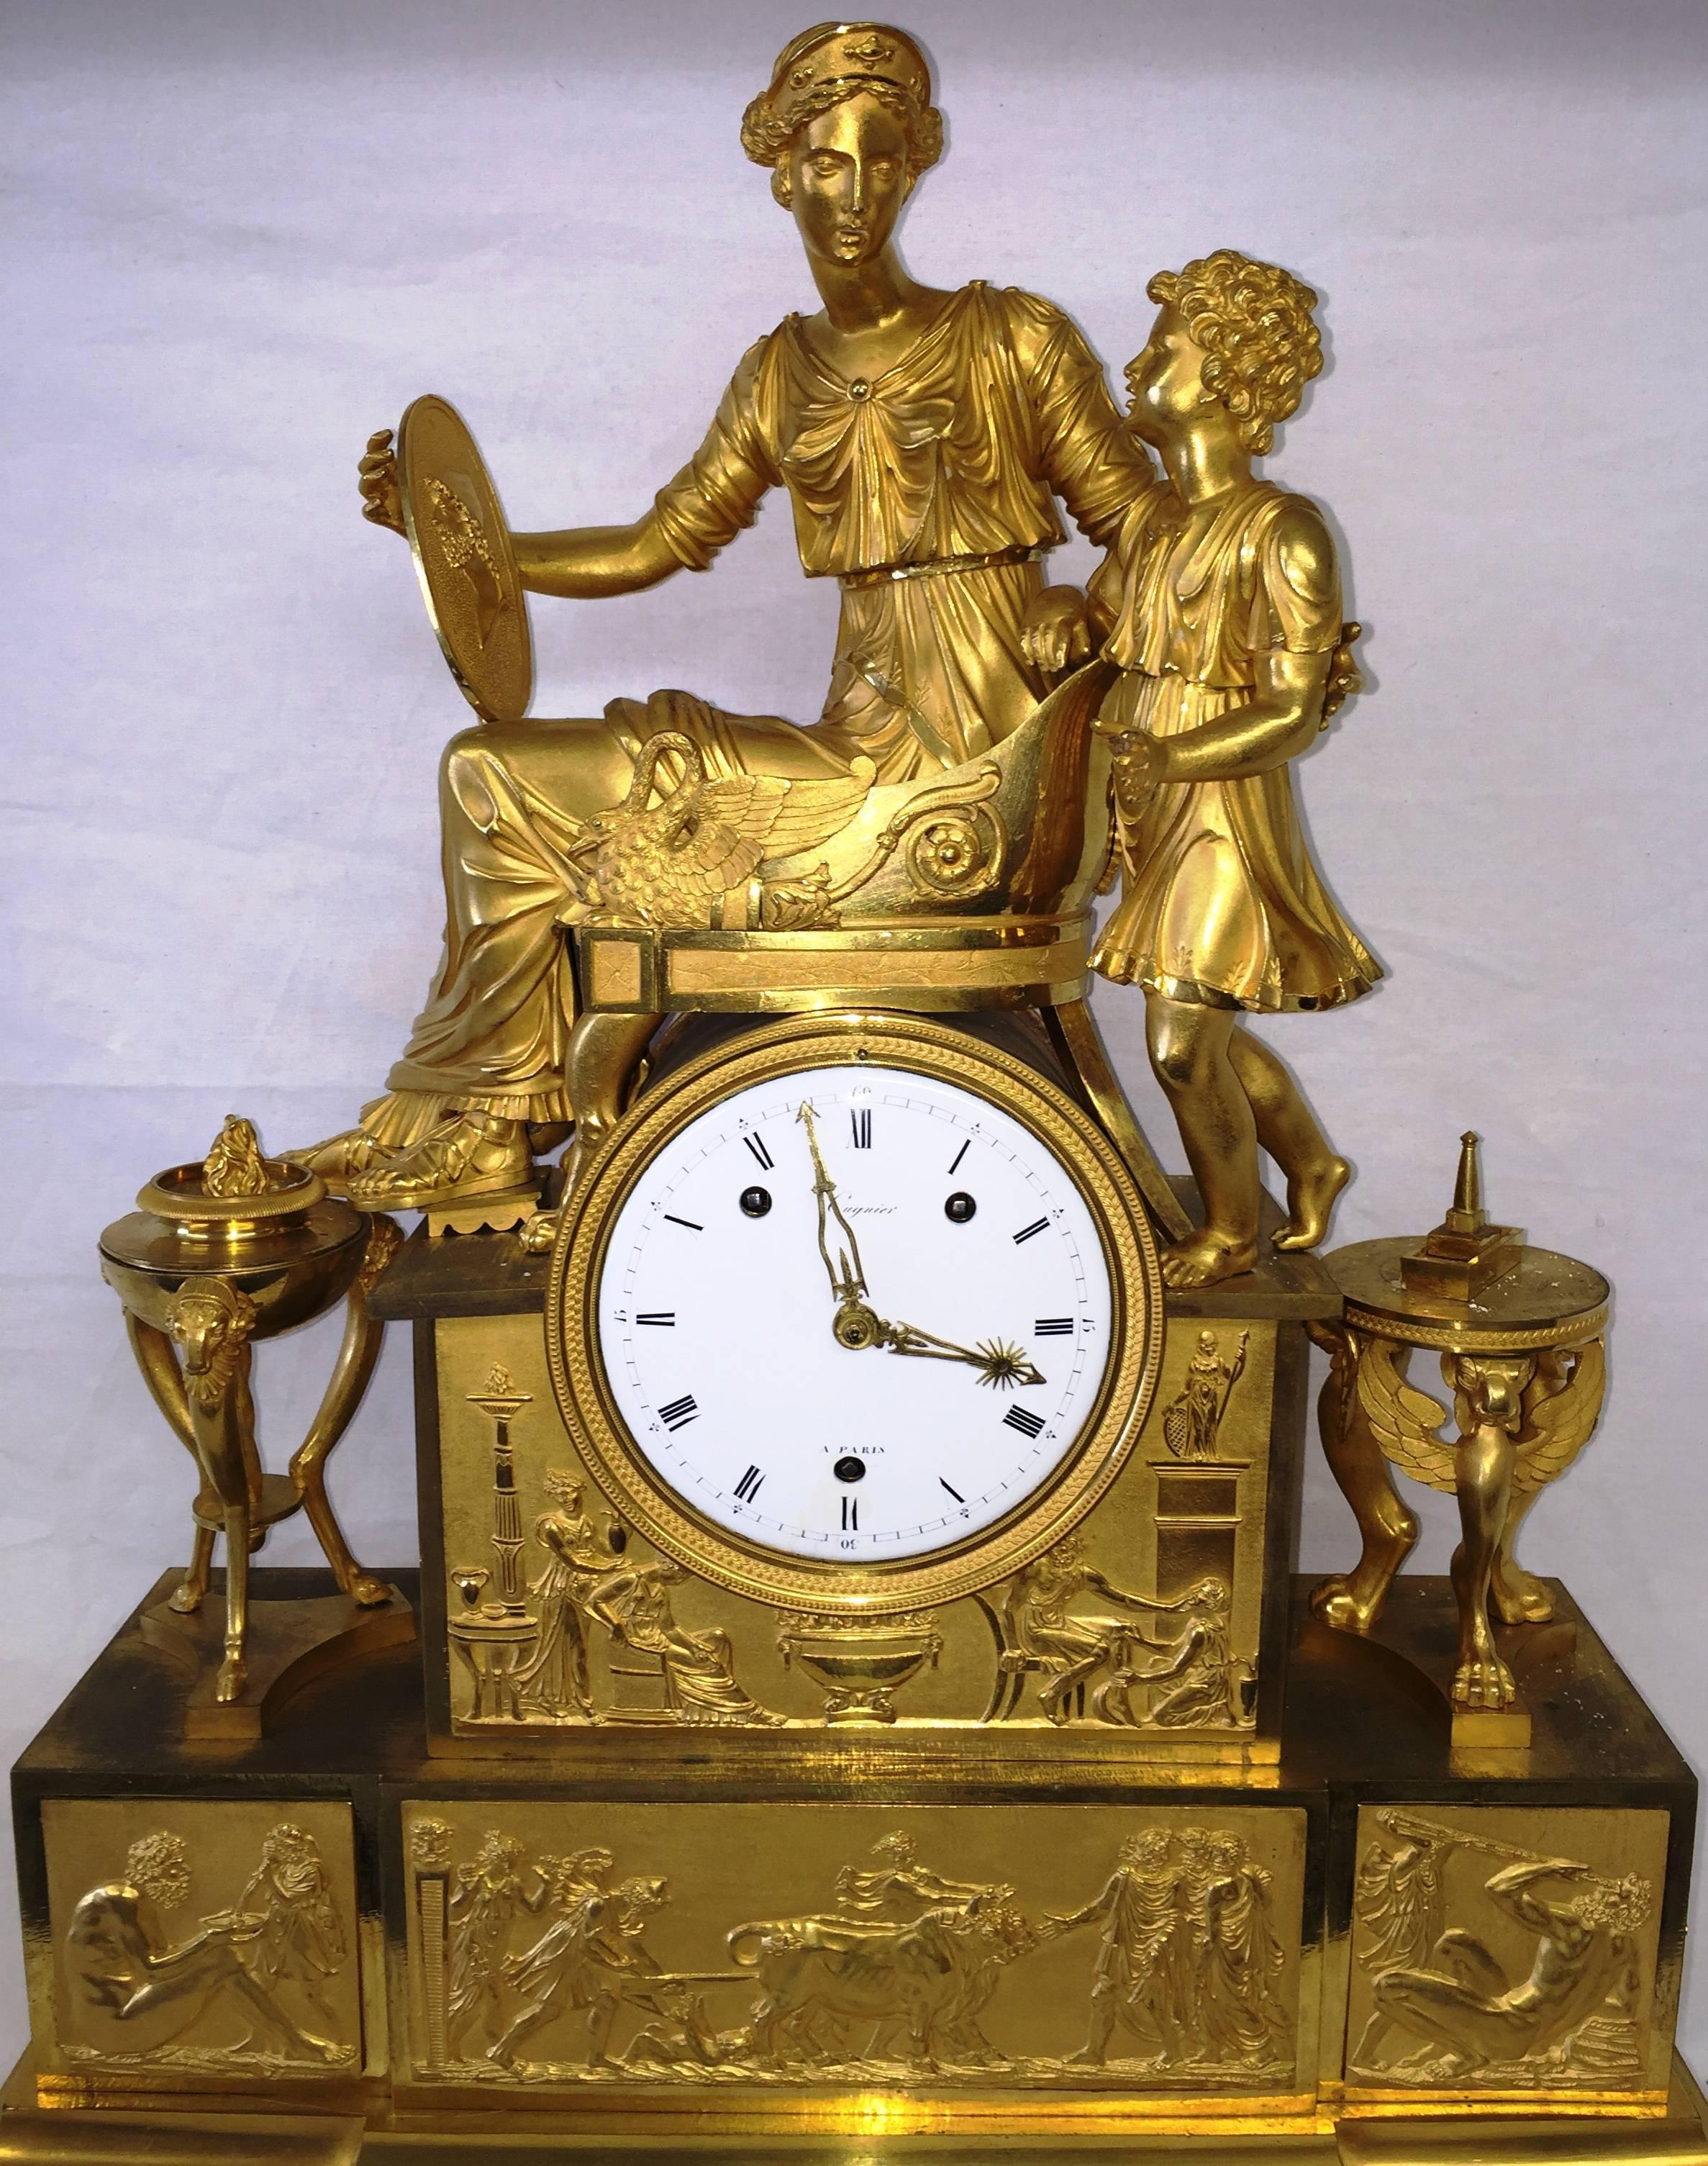 A very impressive 18th century French Empire gilded ormolu mantel clock. Depicting mother and child and various classical panels in relief. The three train striking and repeating movement. 
Signed to the face; Cugnier, Paris.